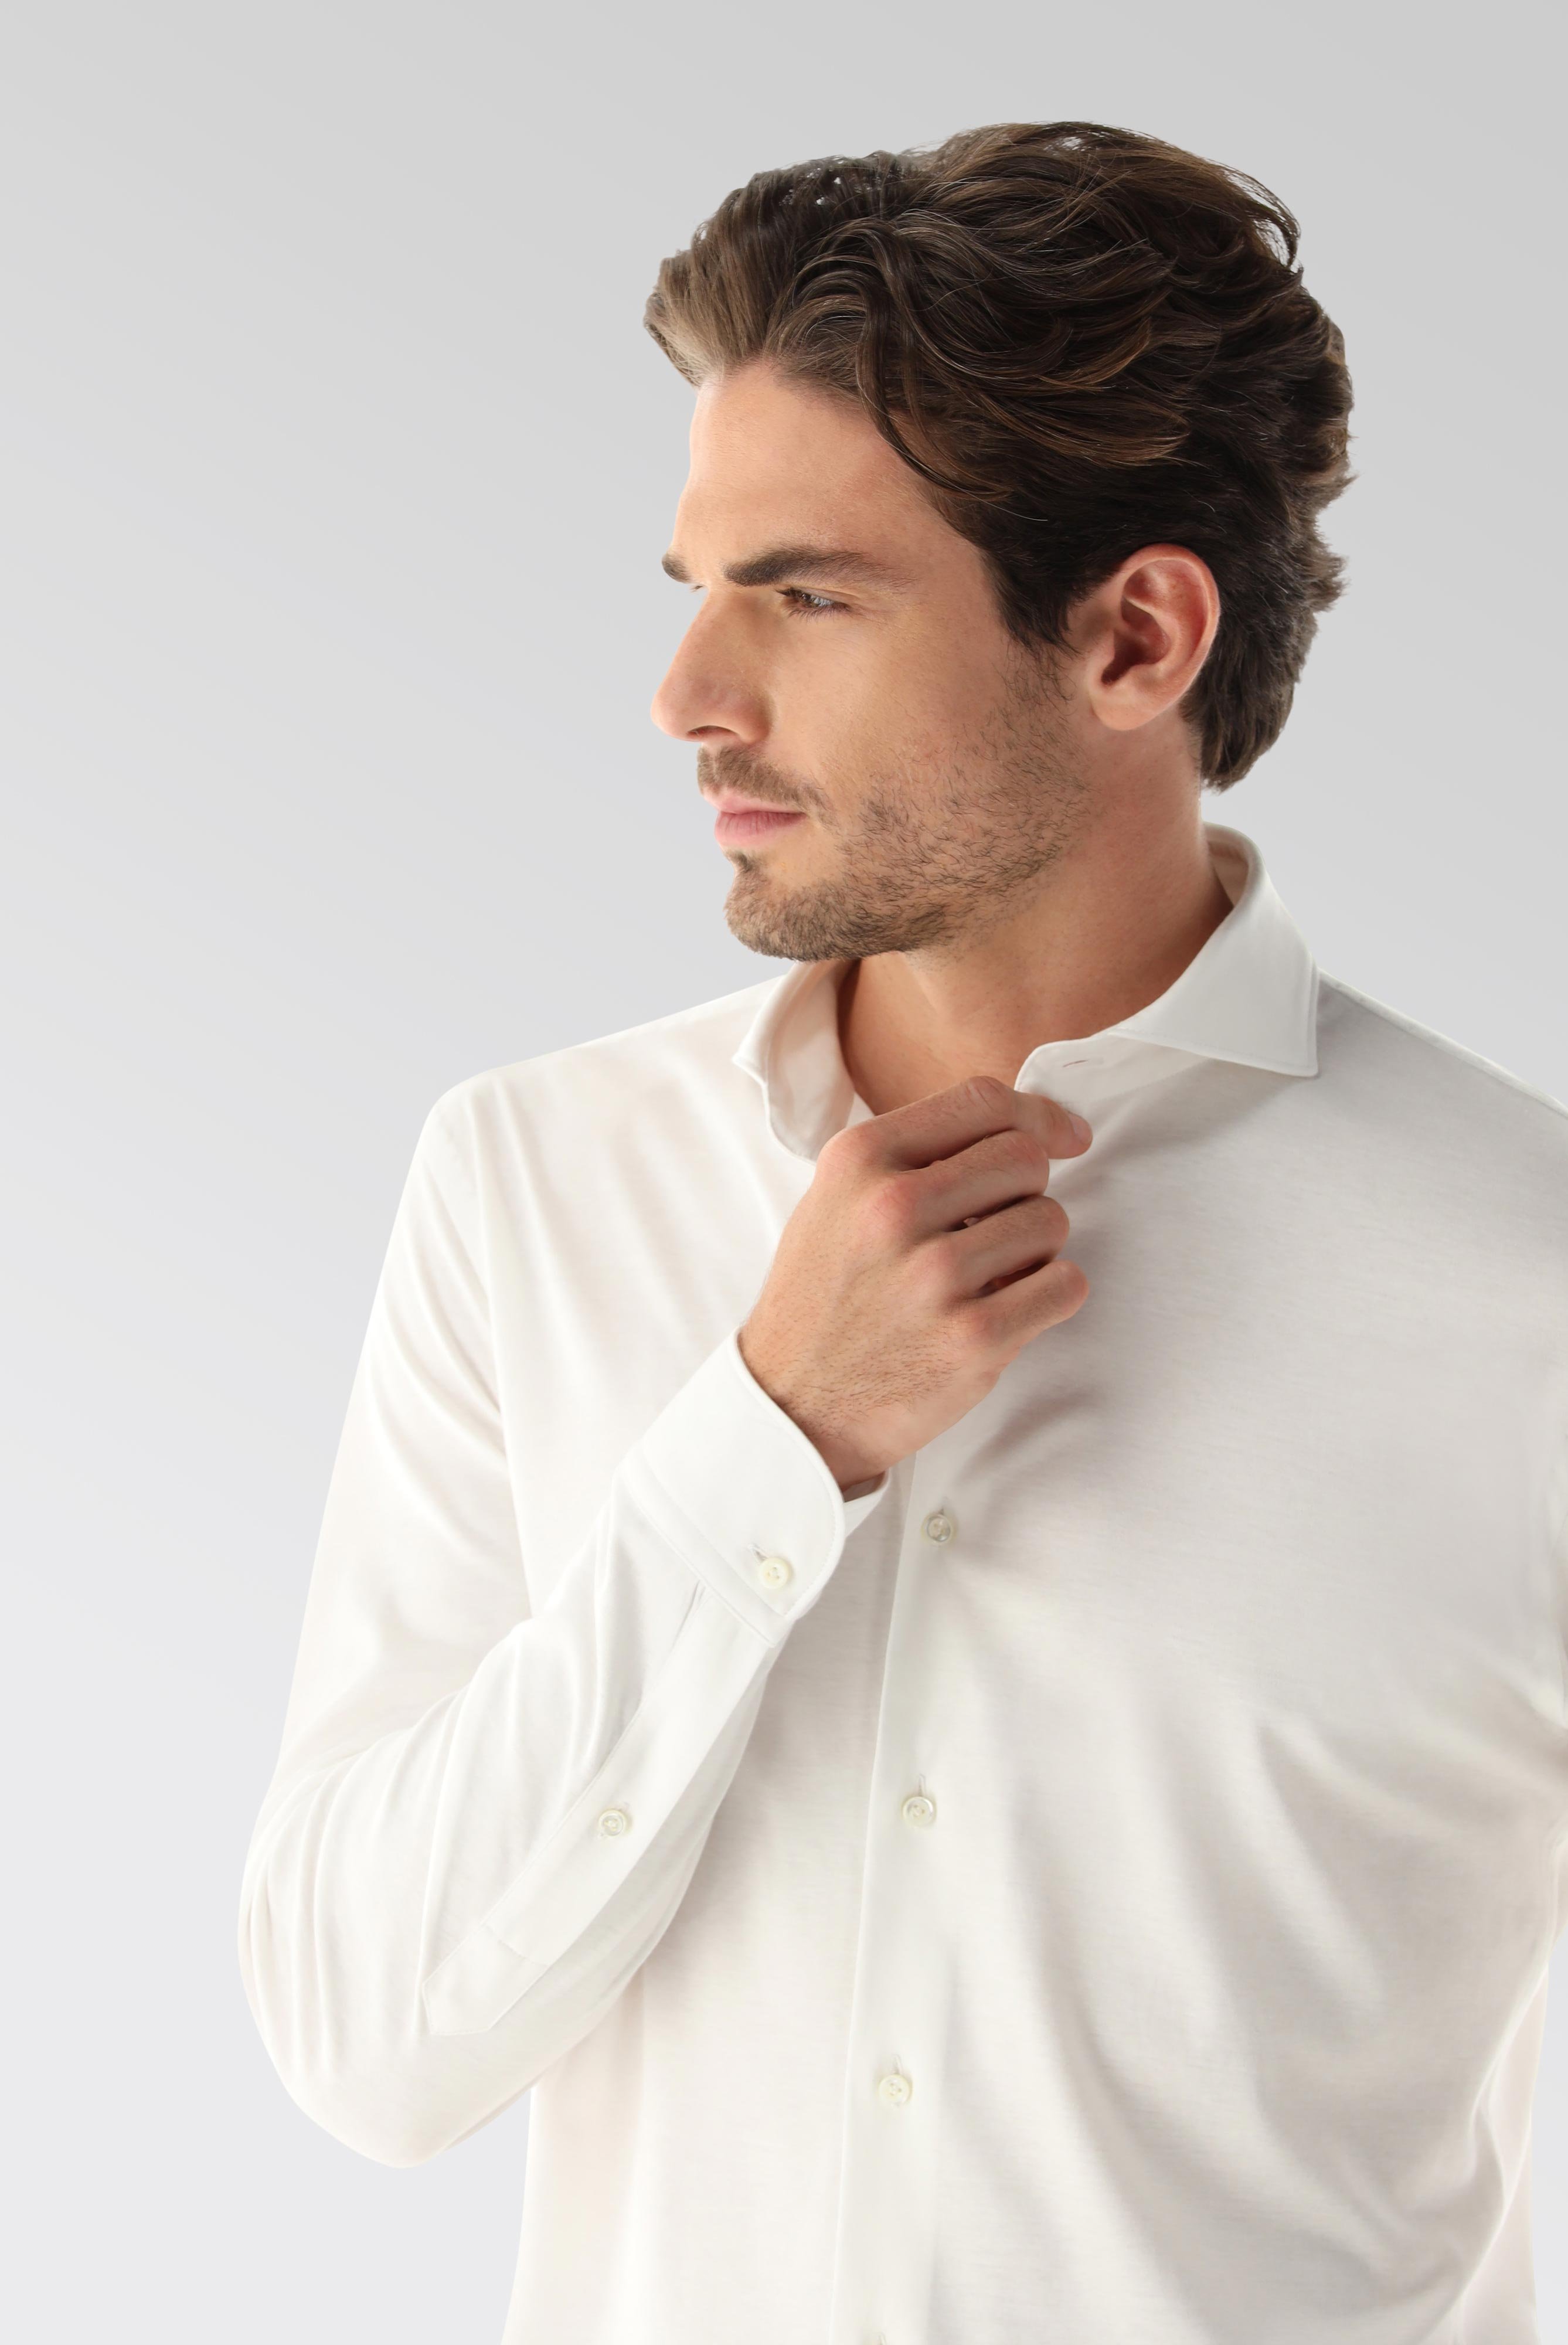 Easy Iron Shirts+Swiss Cotton Jersey Shirt Tailor Fit+20.1683.UC.180031.000.L